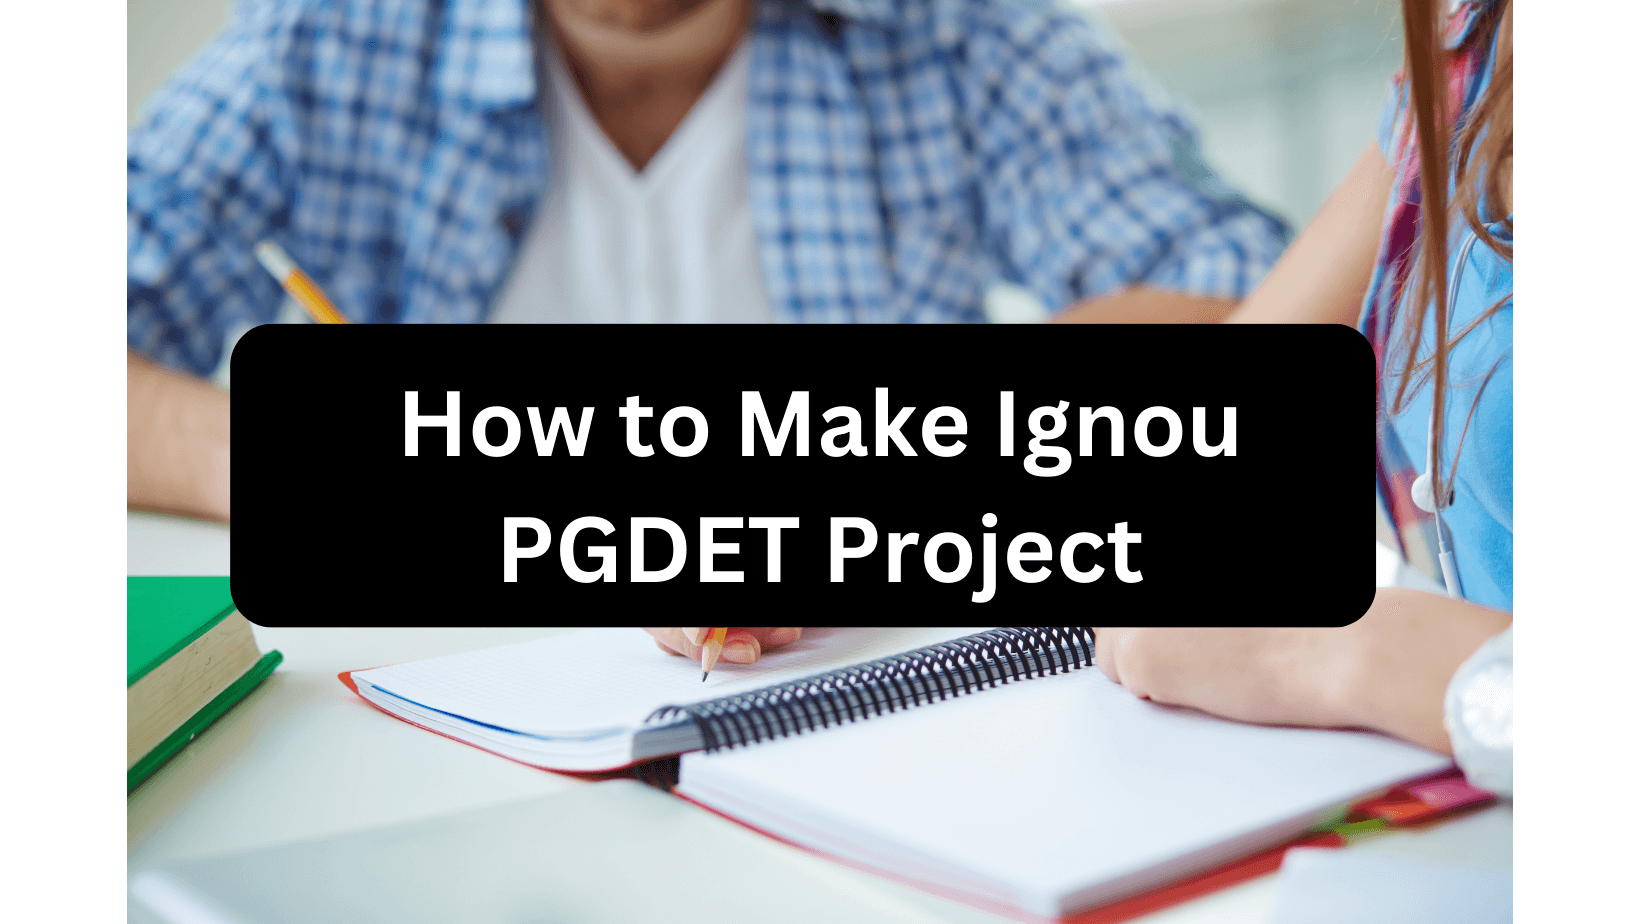 Two students writing their Ignou PGDET Project